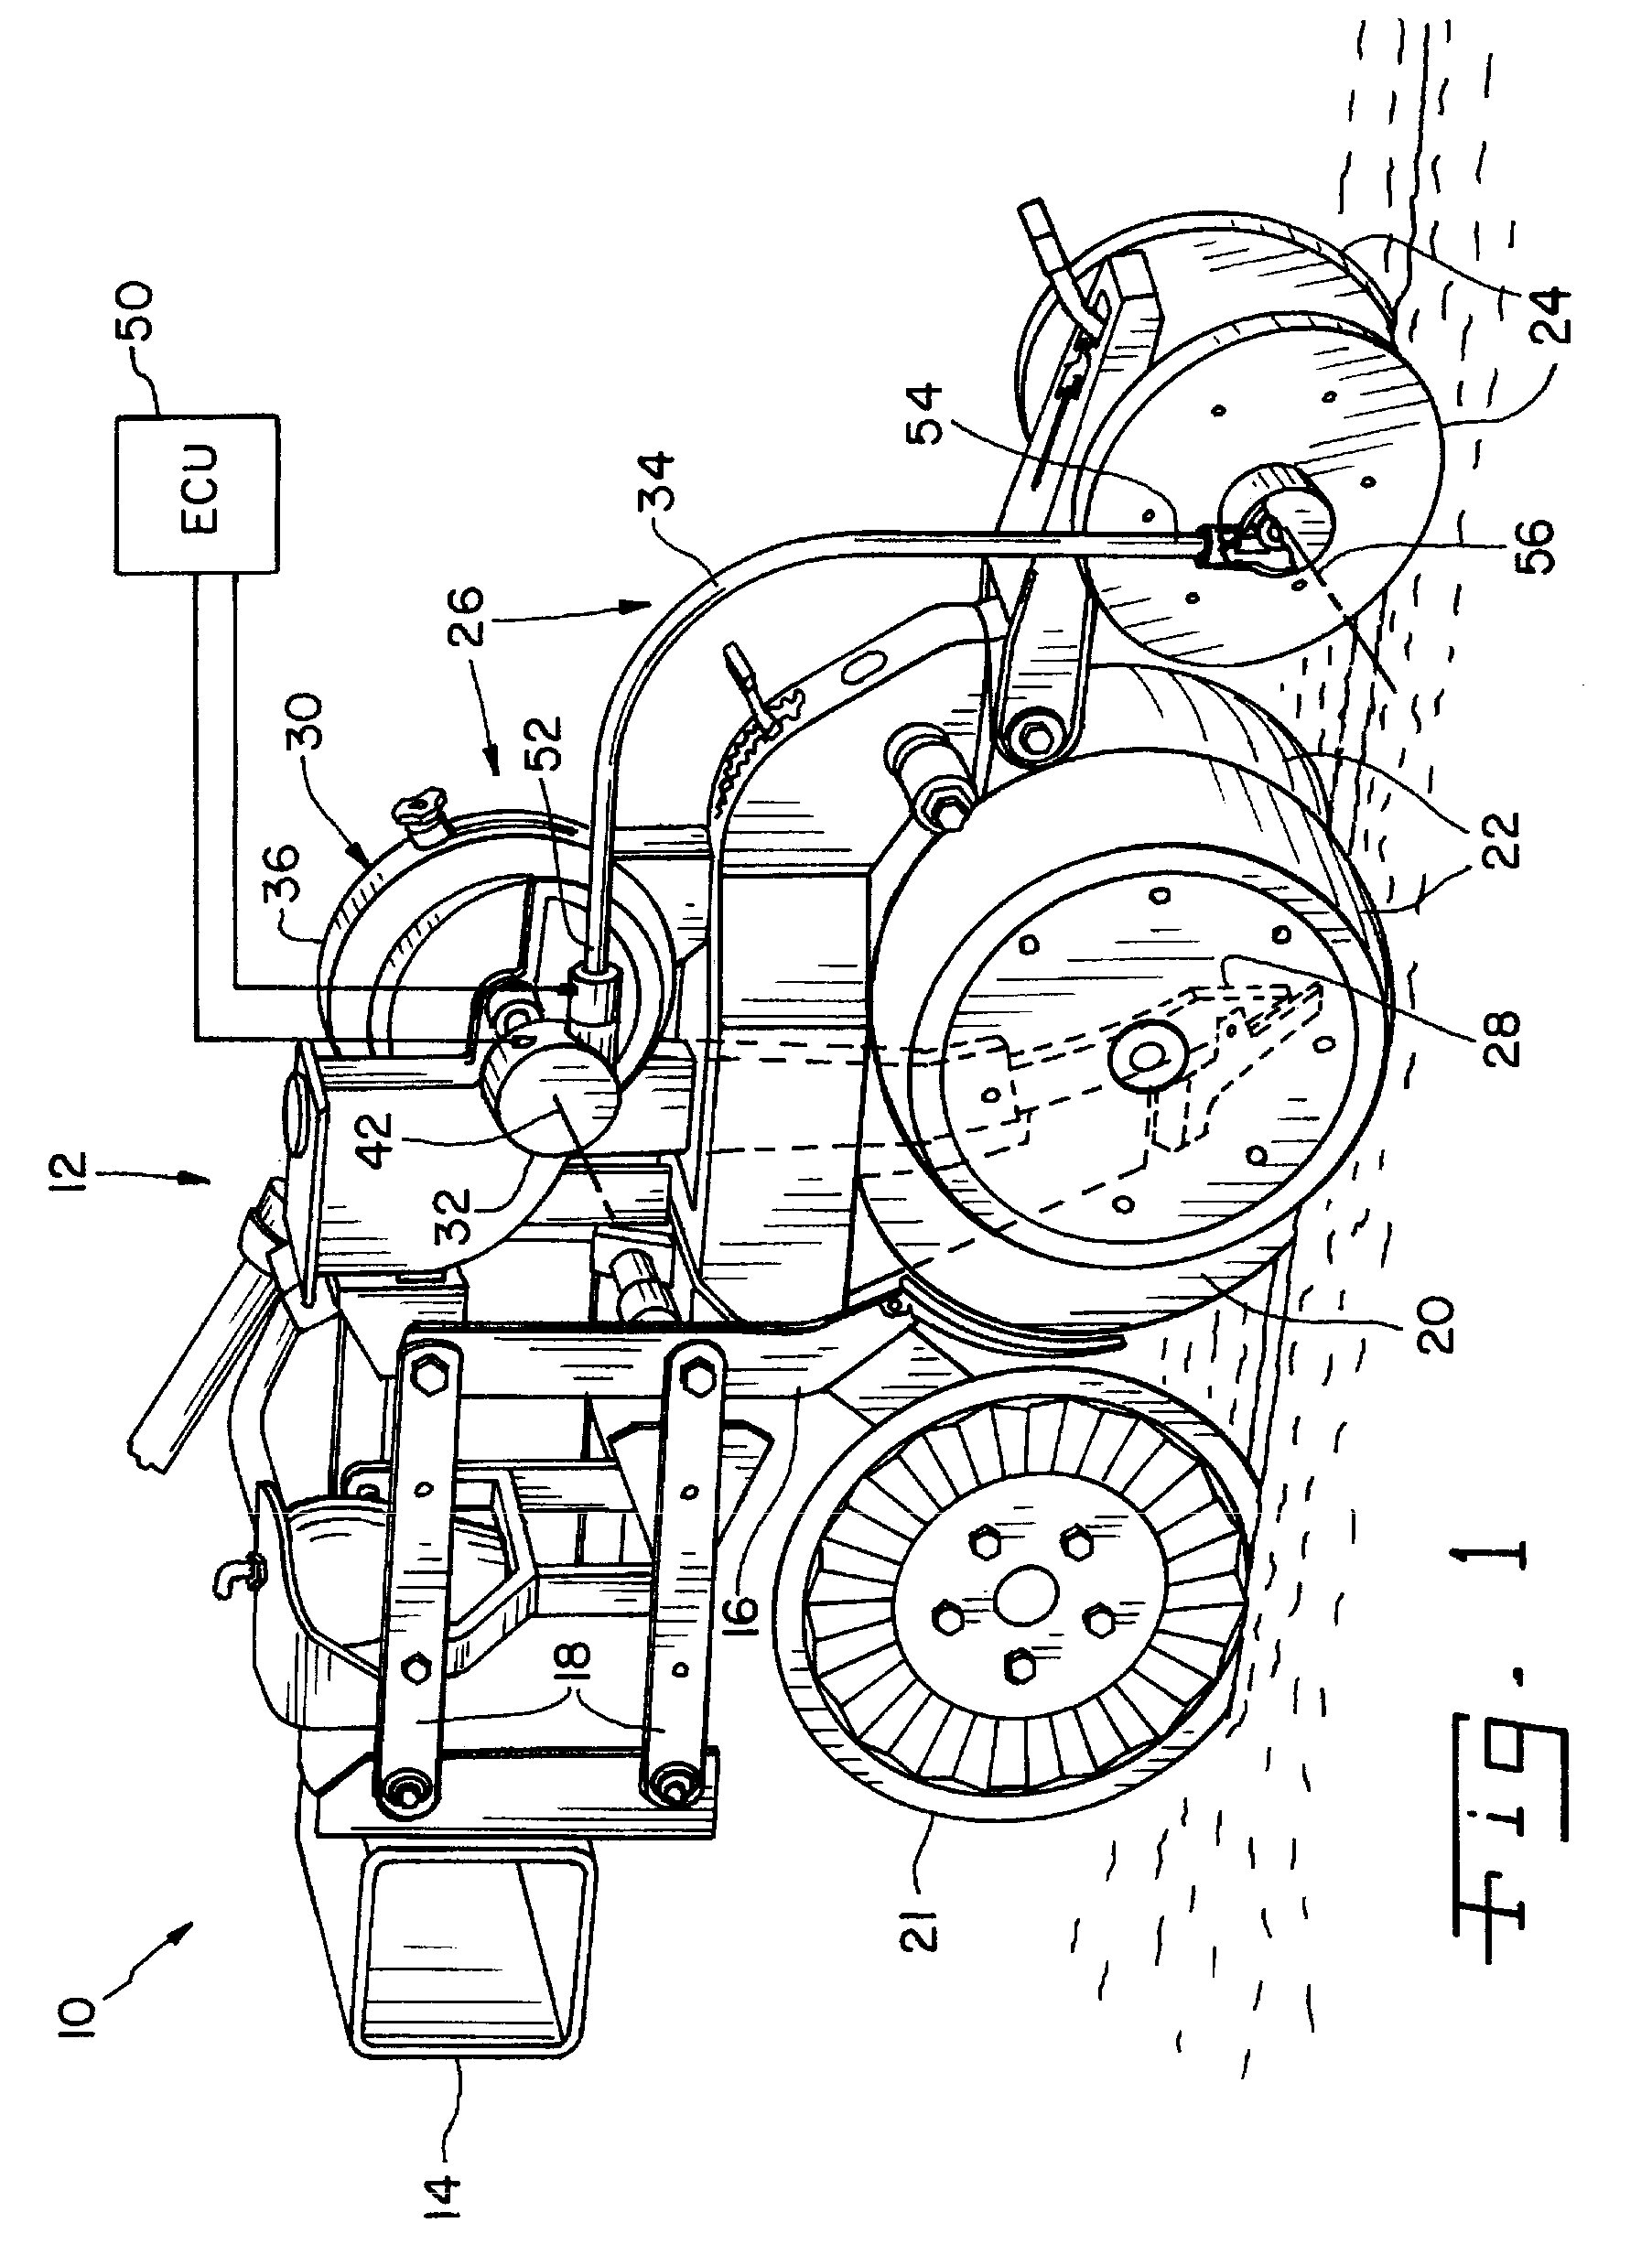 Ground driven seed metering system with a continuously variable transmission